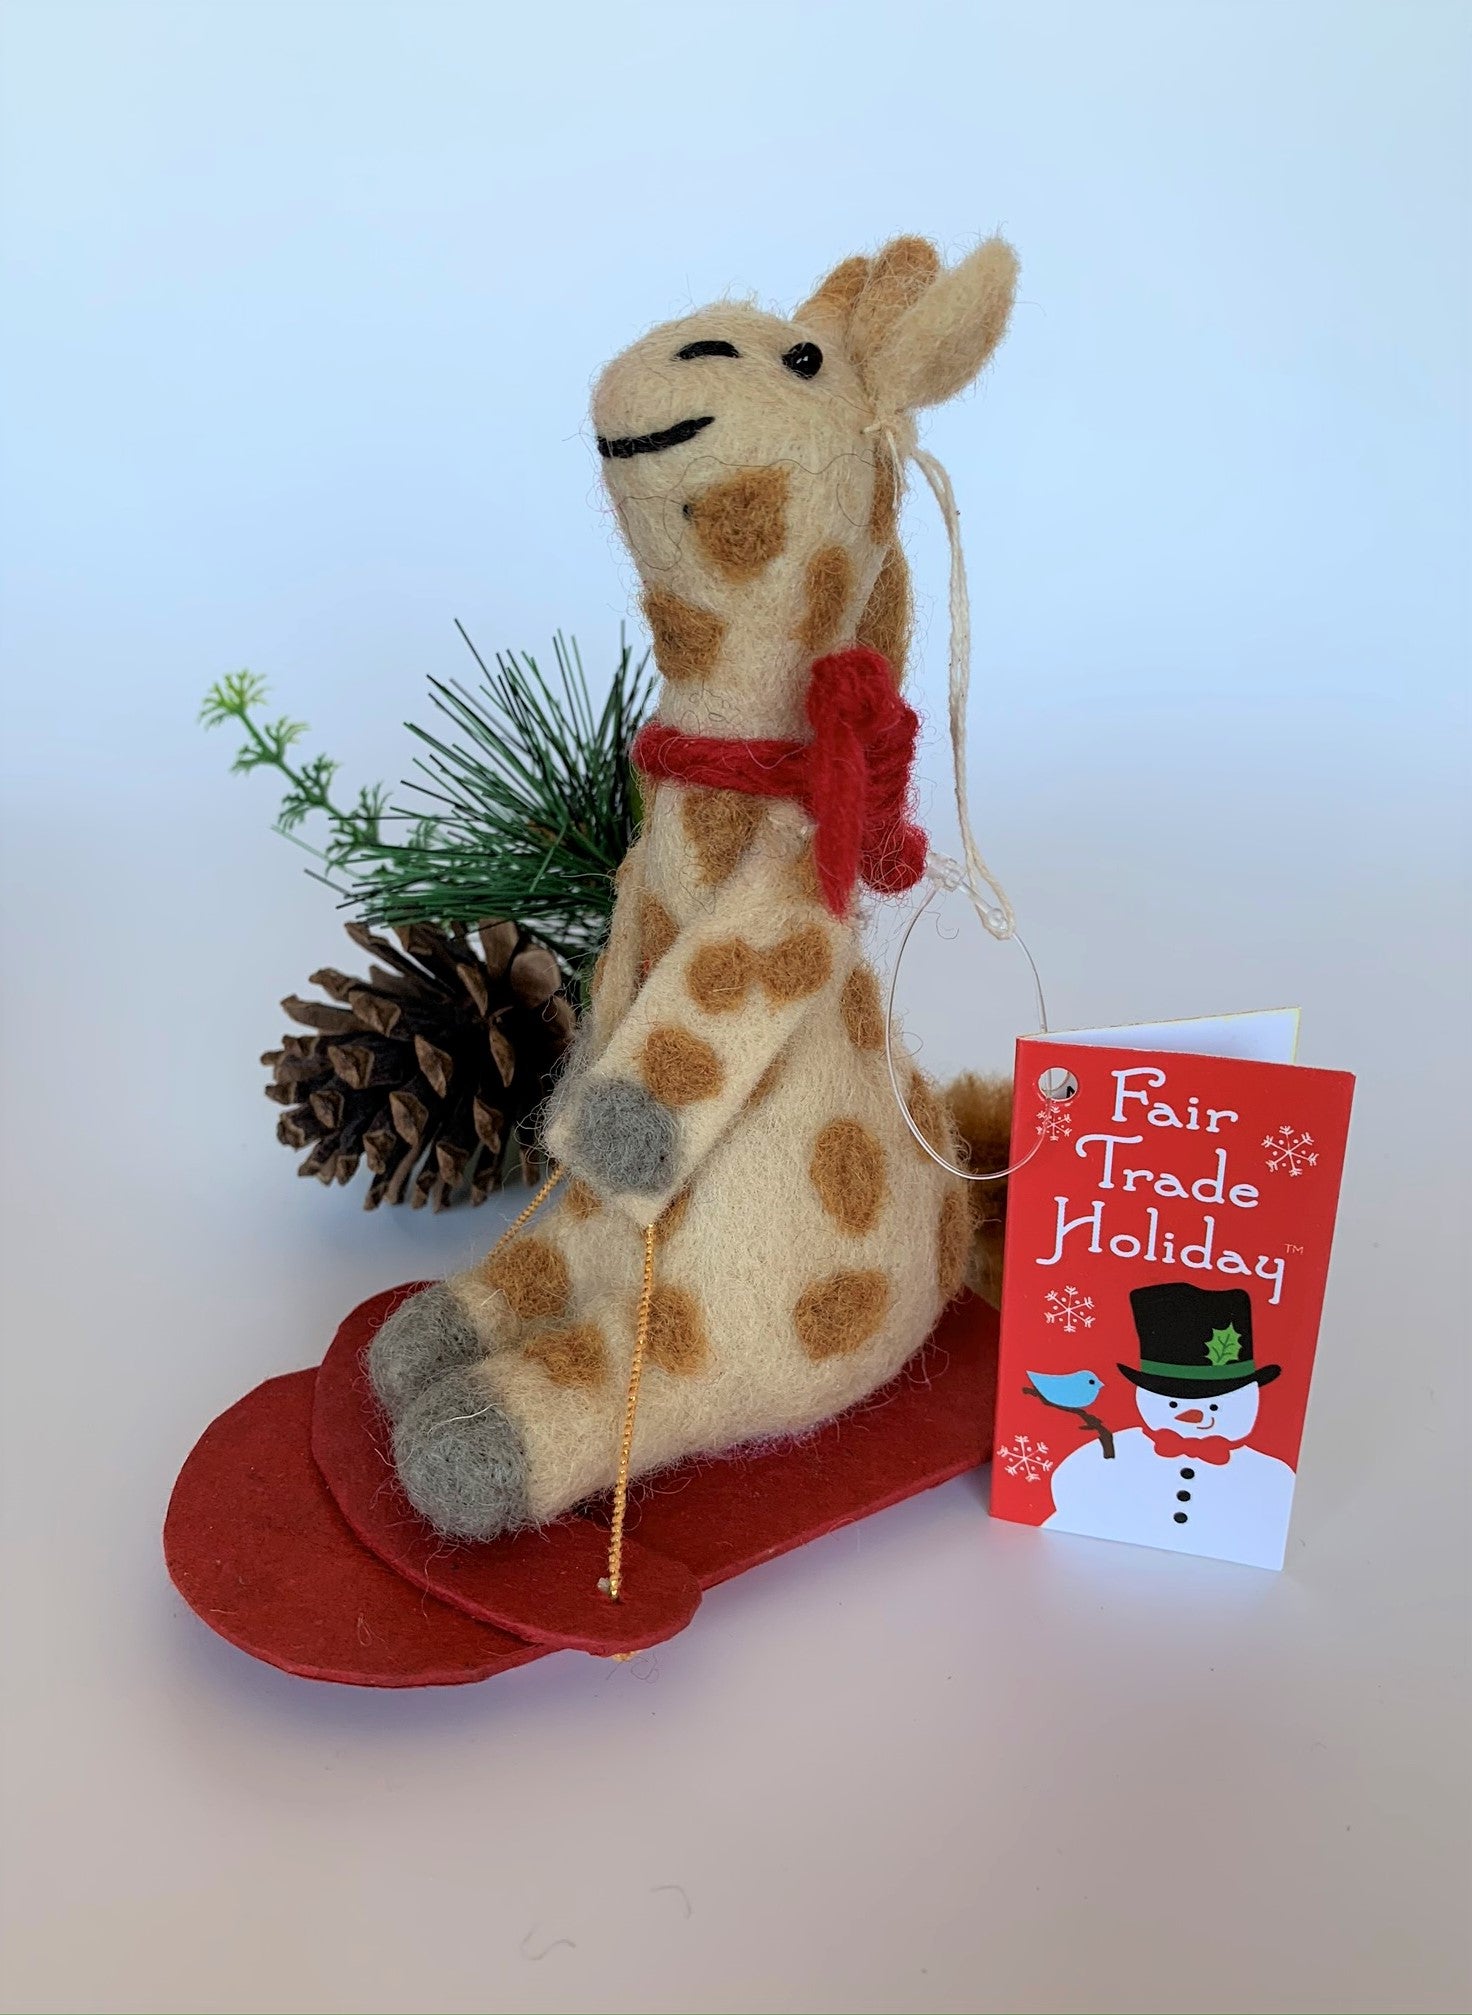 This is a side view of a sledding giraffe Christmas ornament that is handcrafted (fair trade) and made of 100% natural wool. The sled is handmade using paper that is hardened and feels almost like thin wood. It is tan with brown spots, gray accents on feet and hands, with black accents (mouth, eyes, etc.) and wearing a red winter scarf. It sits on a red sled, holding a gold sled "rope." Approximately 6"x4.75x1.5". It comes with a fair trade holiday "to/from" tag to use if giving this as a gift.